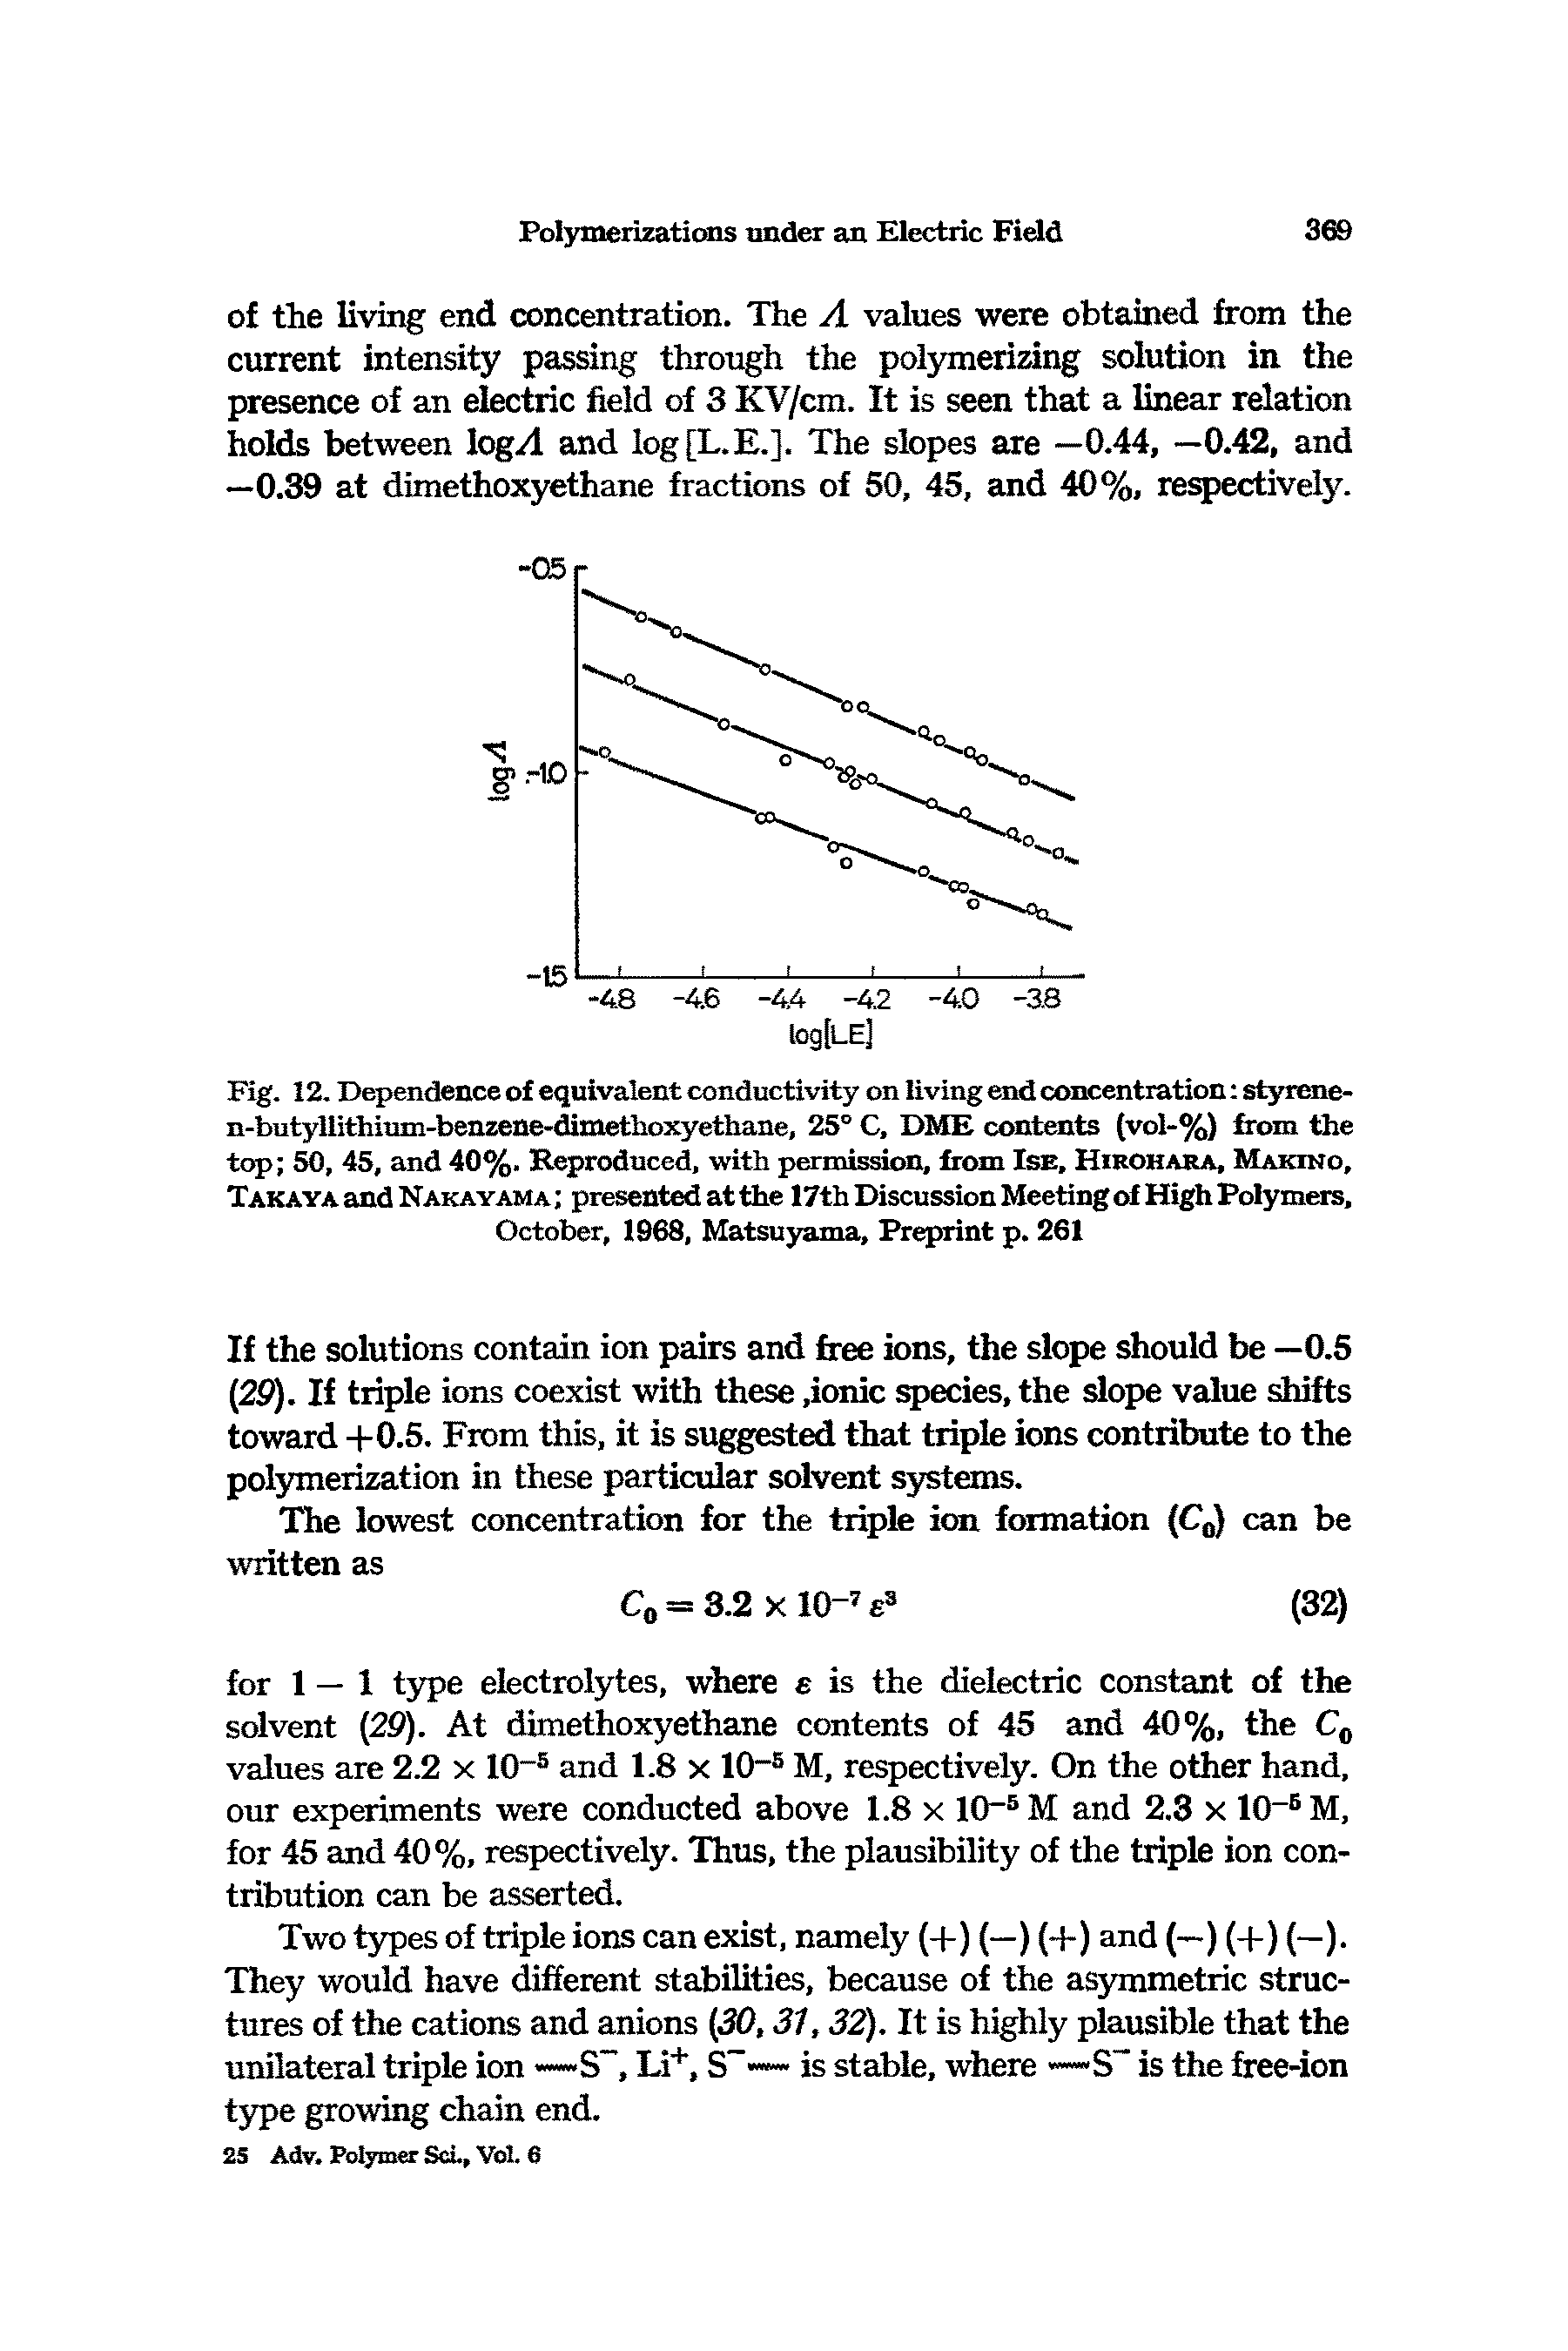 Fig. 12. Dependence of equivalent conductivity on living end concentration styrene-n-butyllithium-benzene-dimethoxyethane, 25° C, DME contents (vol-%) from the top 50, 45, and 40%. Reproduced, with permission, from Ise, Hirohara, Makino, Takaya and Nakayama presented at the 17th Discussion Meeting of High Polymers, October, 1968, Matsuyama, Preprint p. 261...